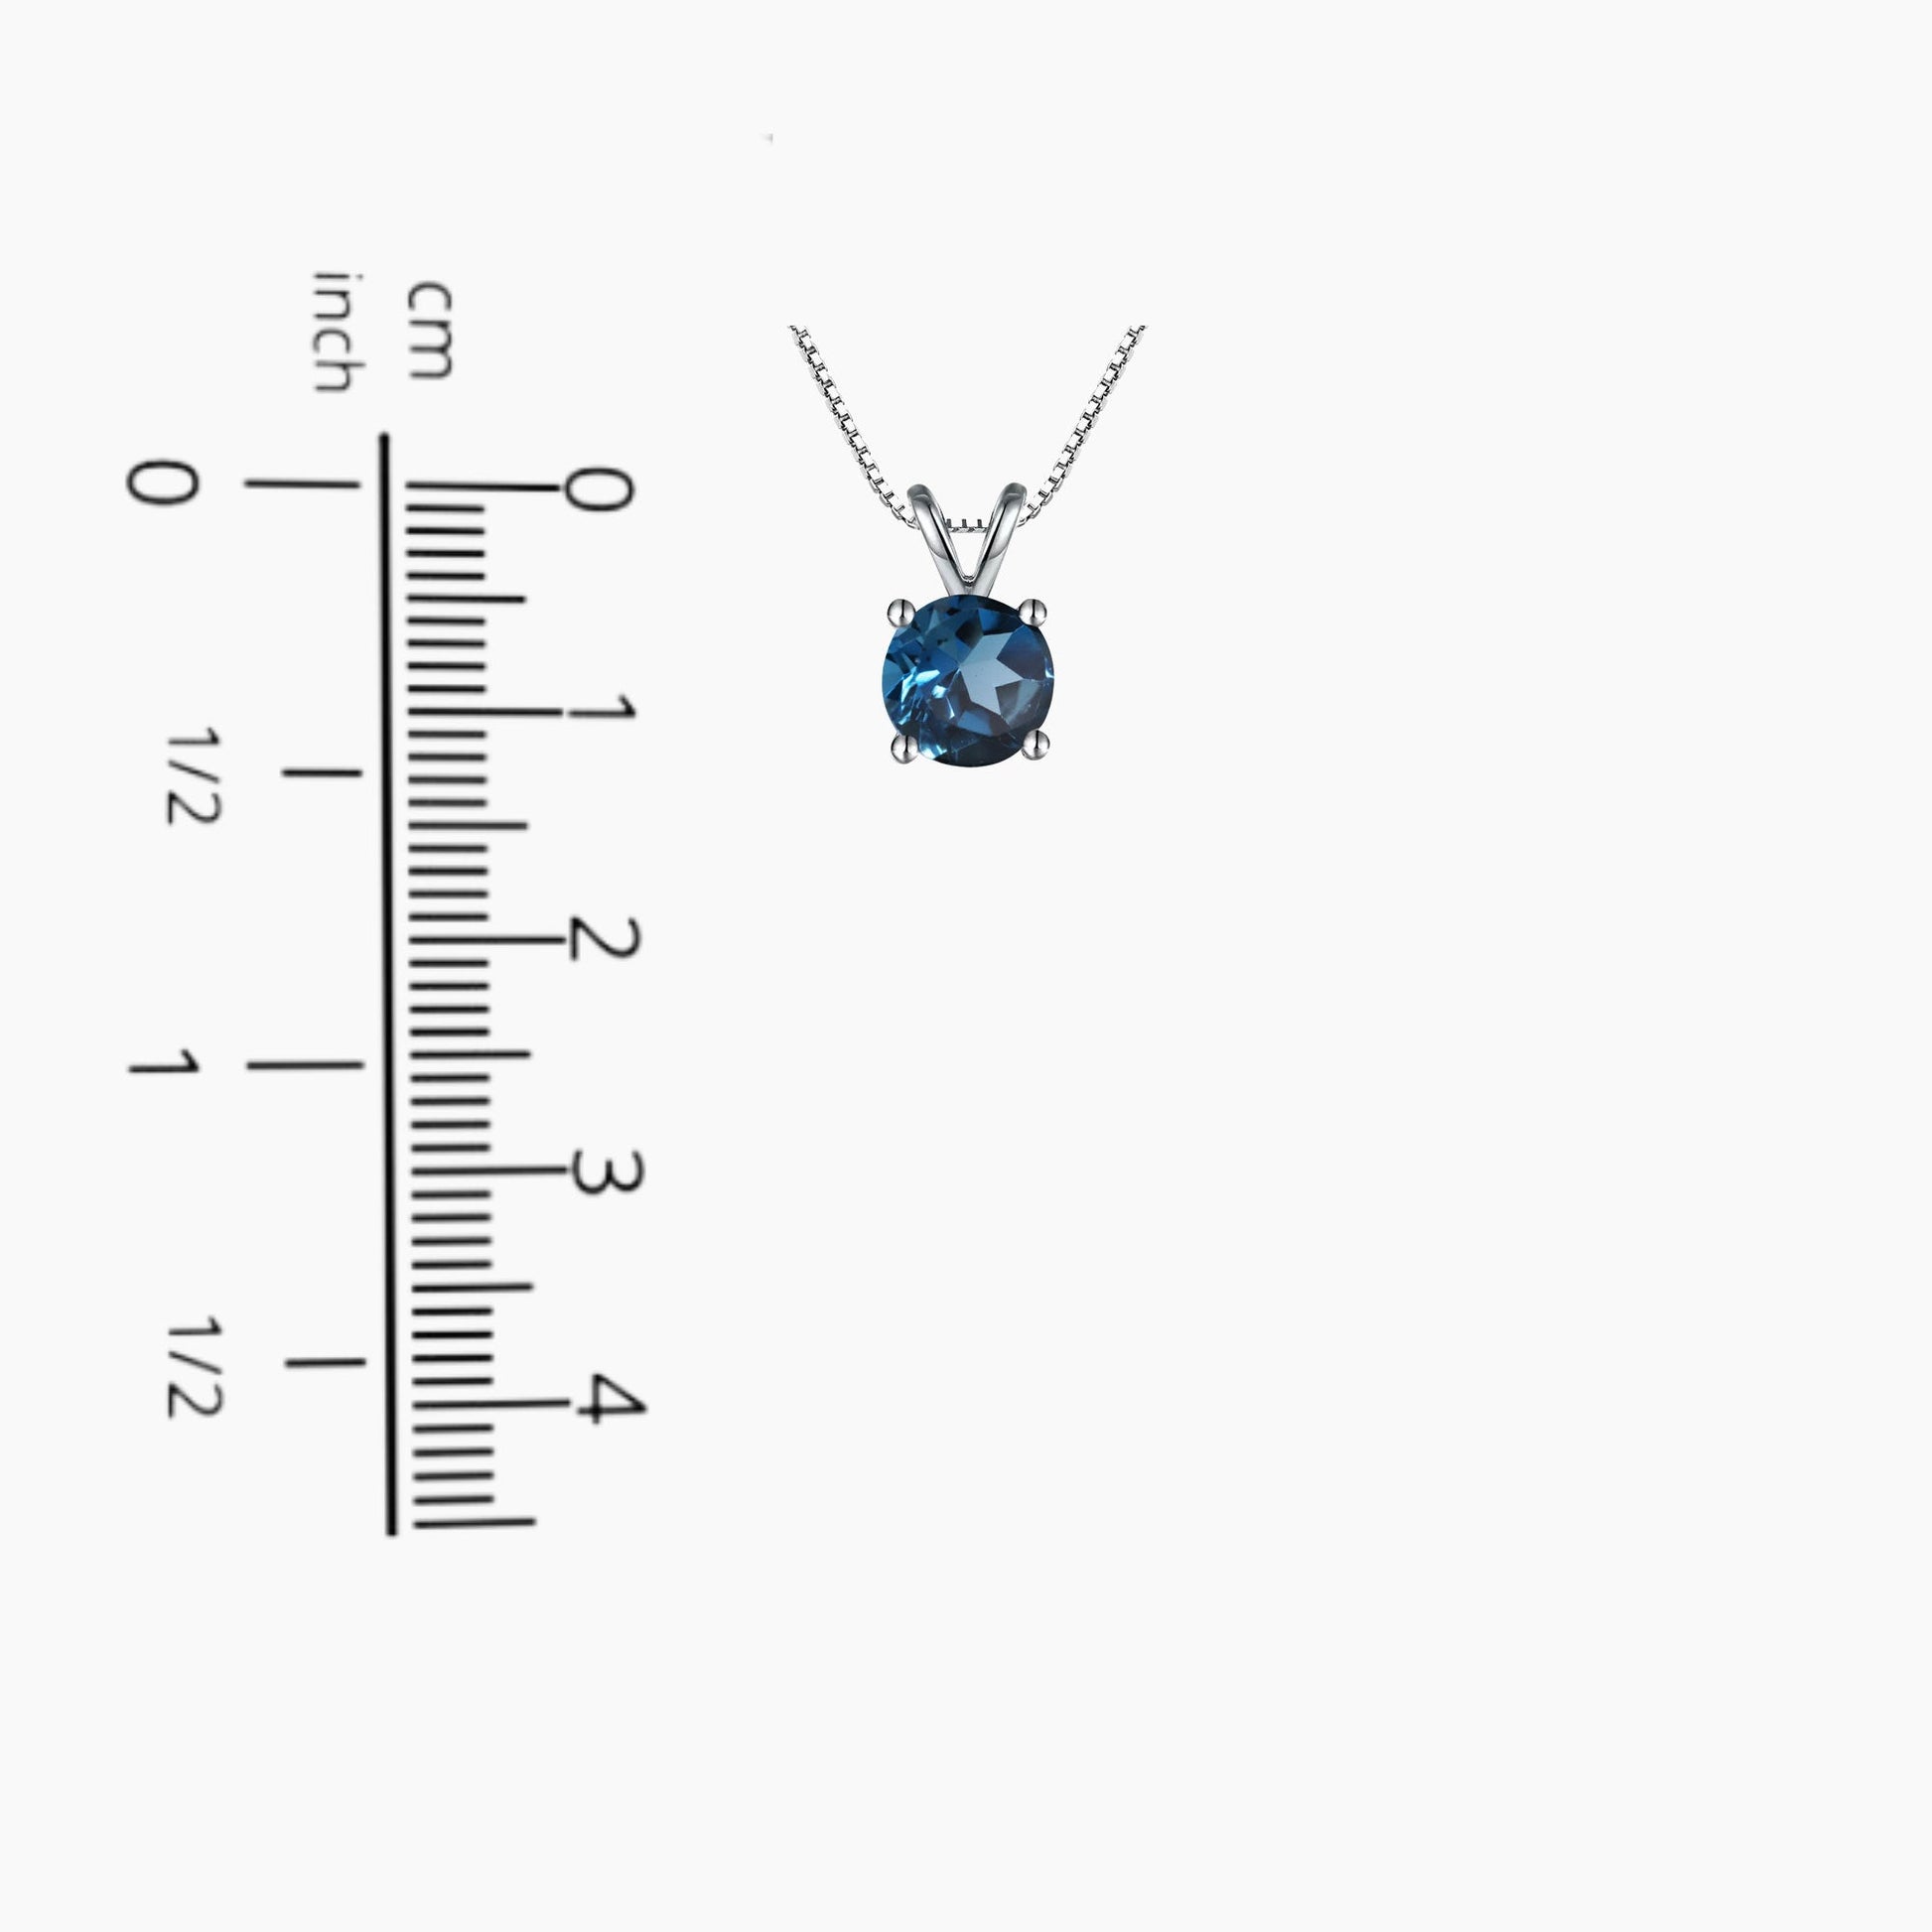 Round Cut London Blue Topaz Pendant displayed next to a scale for size comparison